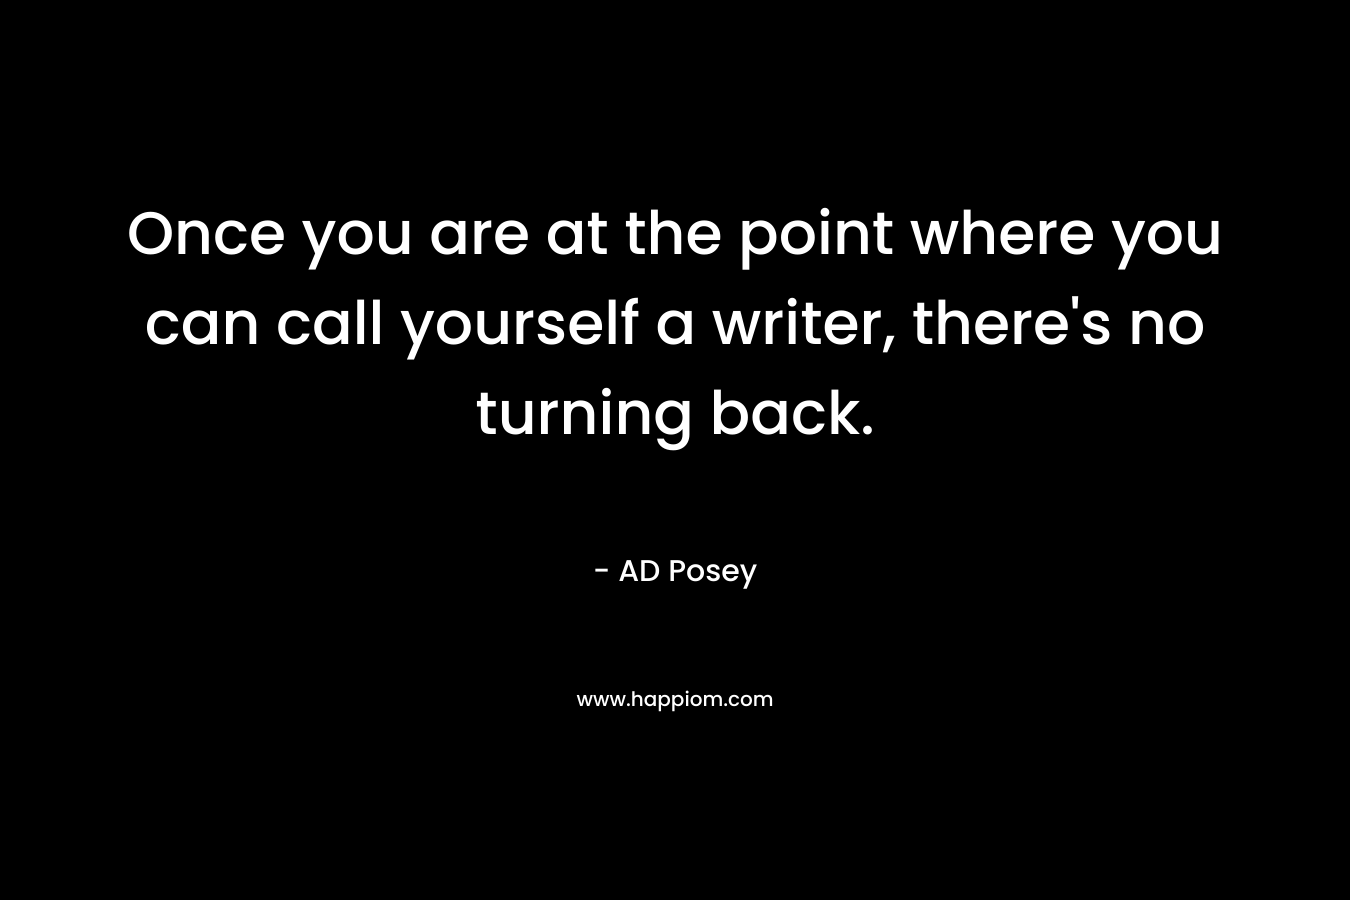 Once you are at the point where you can call yourself a writer, there's no turning back.